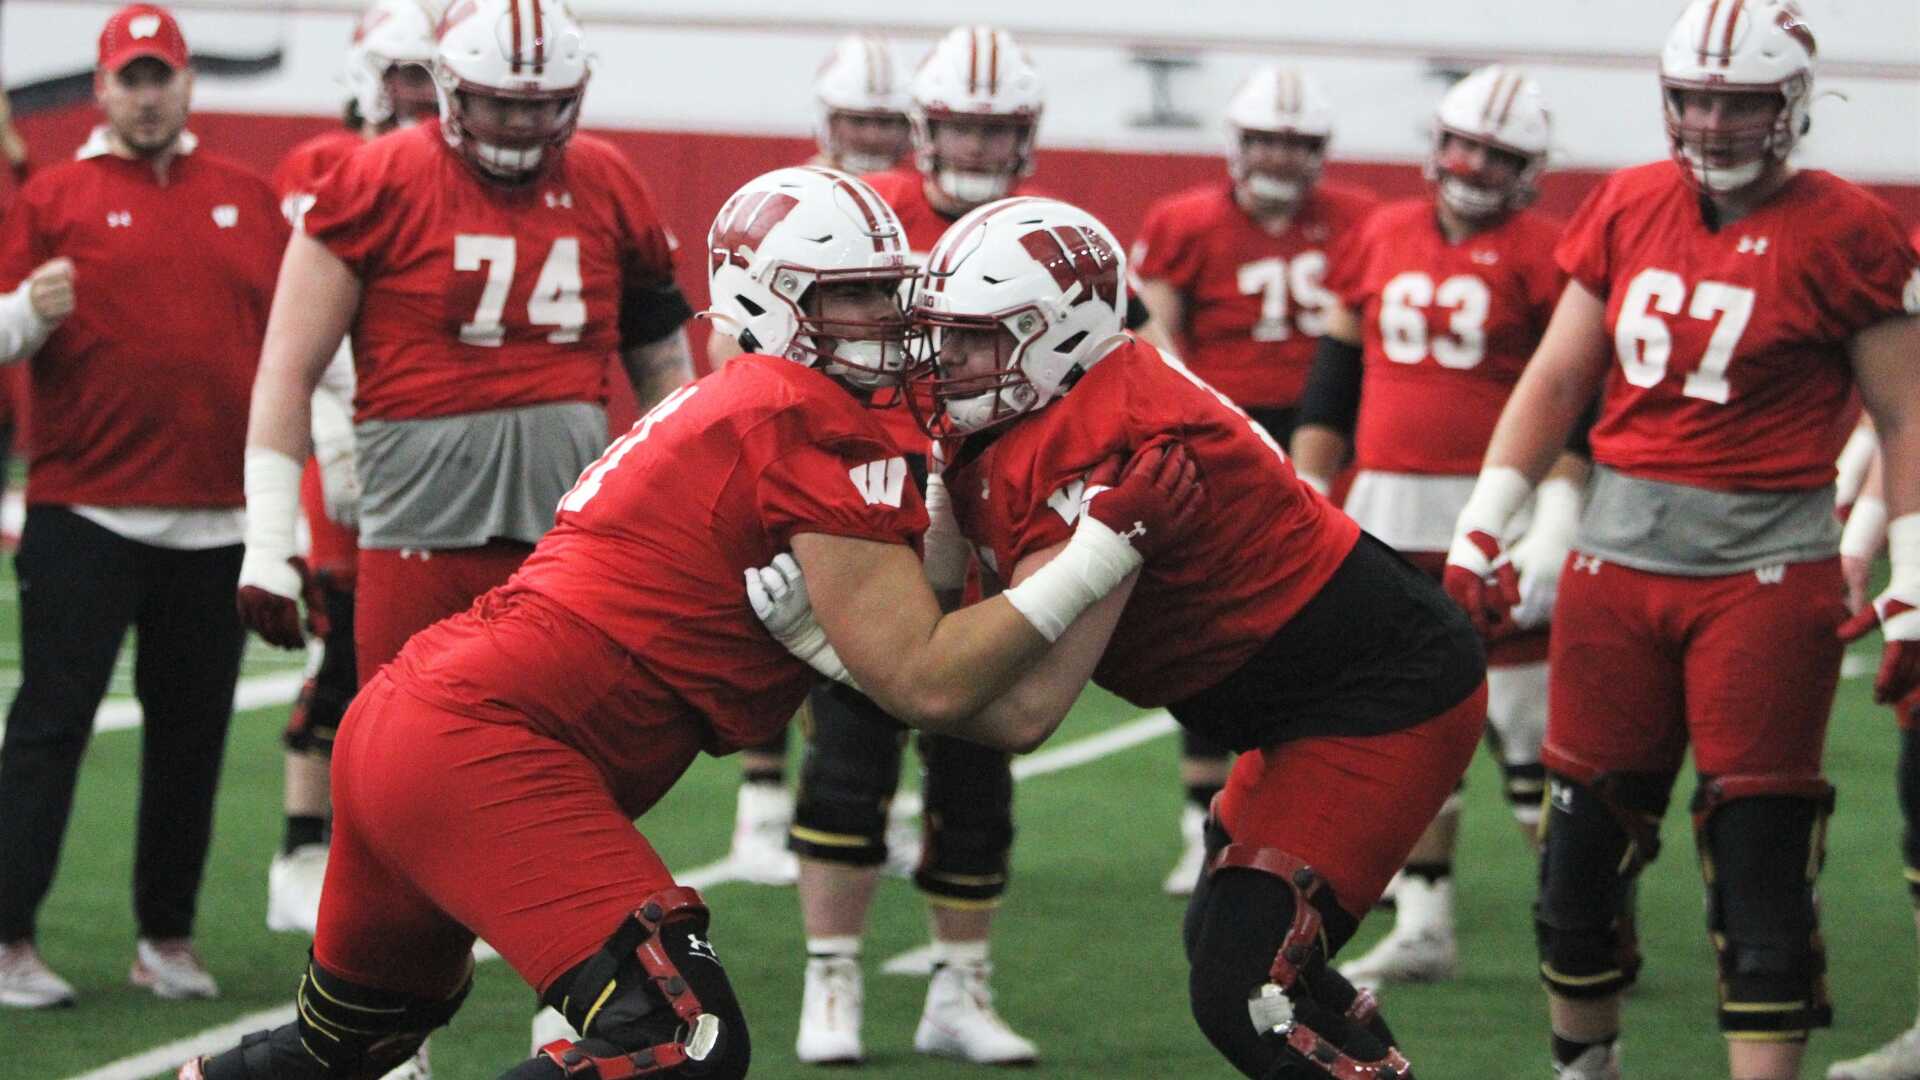 Wisconsin tries to regain supremacy in the trenches under its 4th O-line coach in as many years